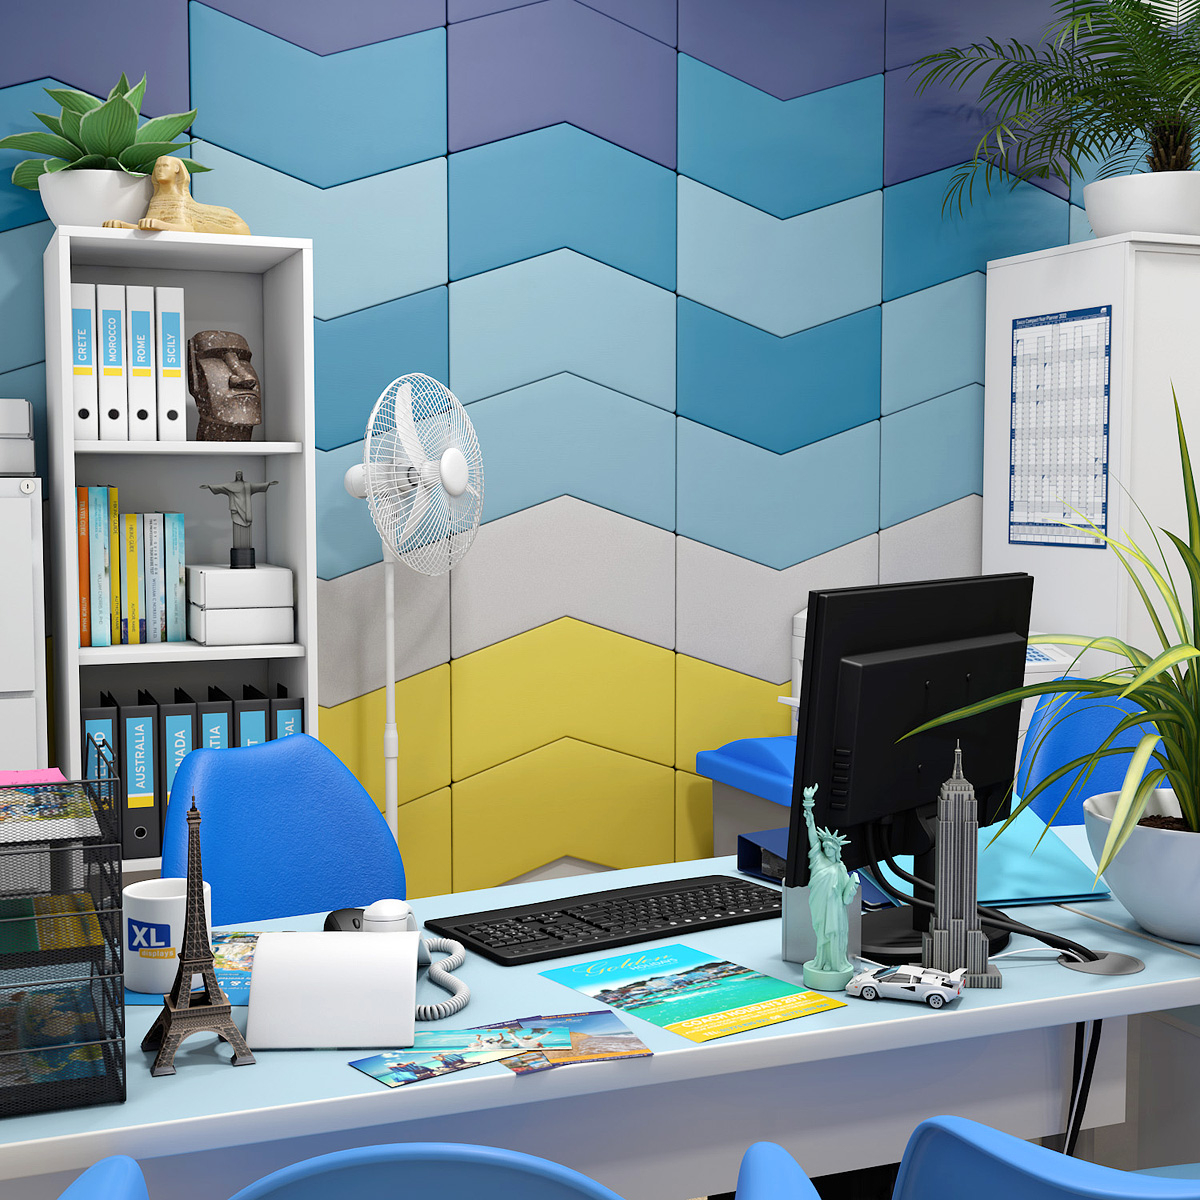 COUNTACH™ Acoustic Wall Tiles Provide Colour, Design And Functionality to Office Walls 